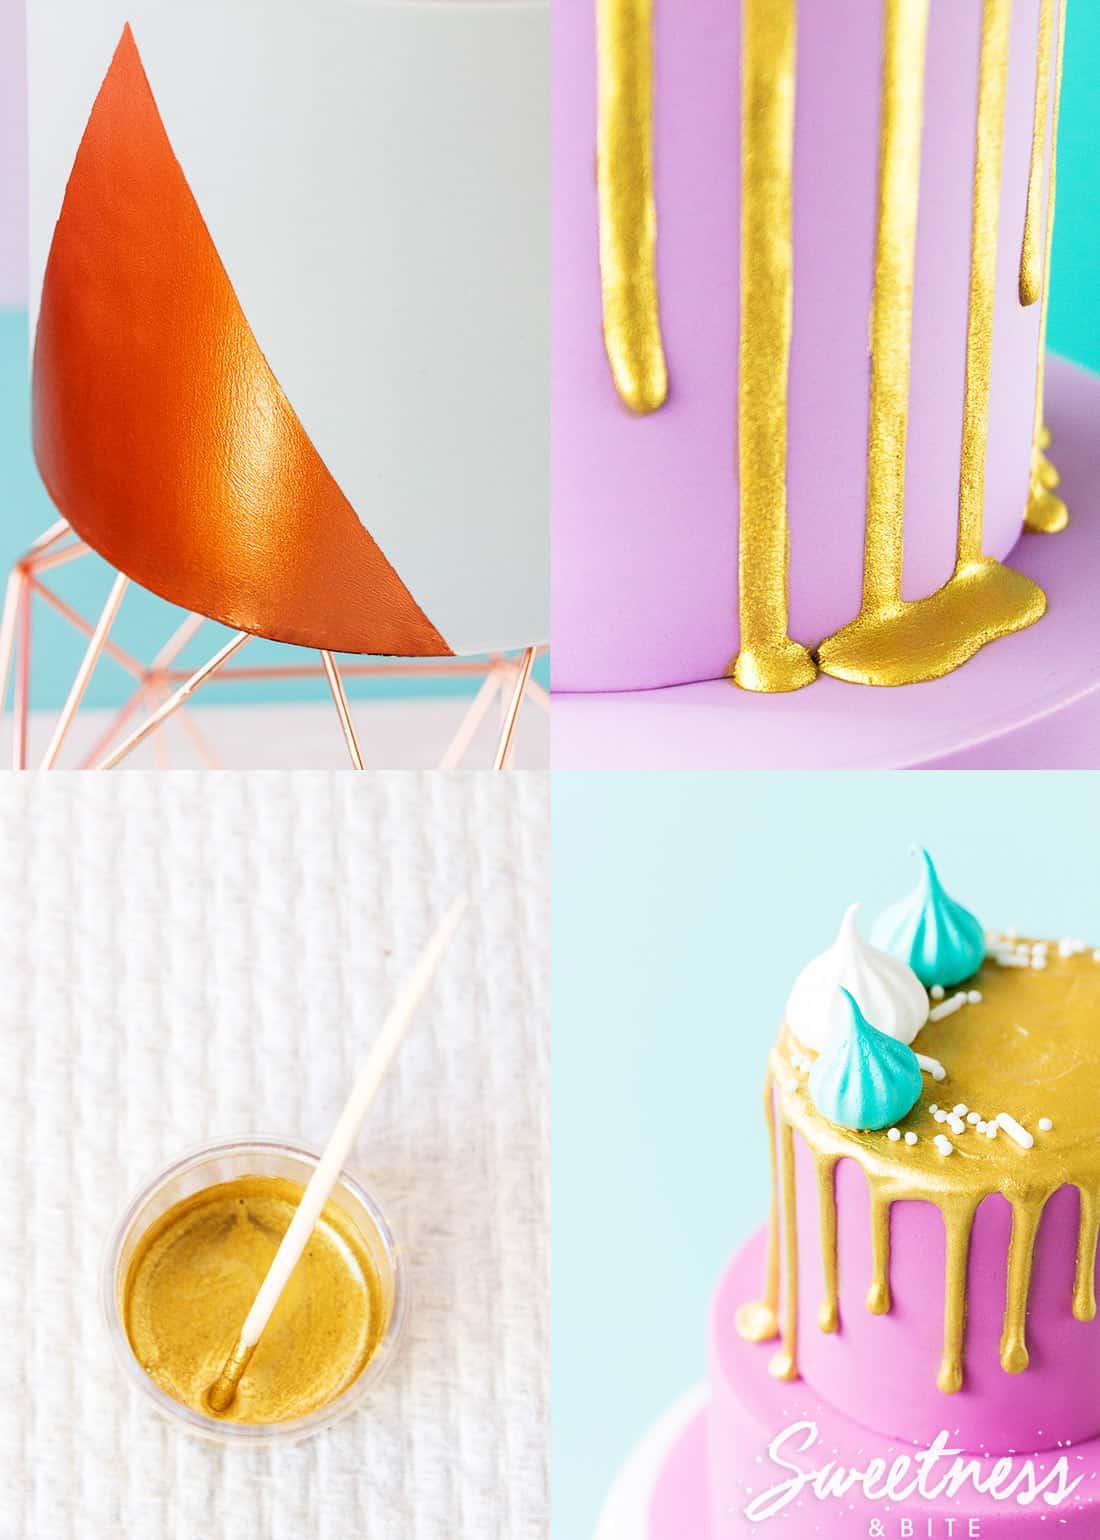 Anyone got a recipe for gold edible paint for a garnish? more info in  comments. : r/cocktails